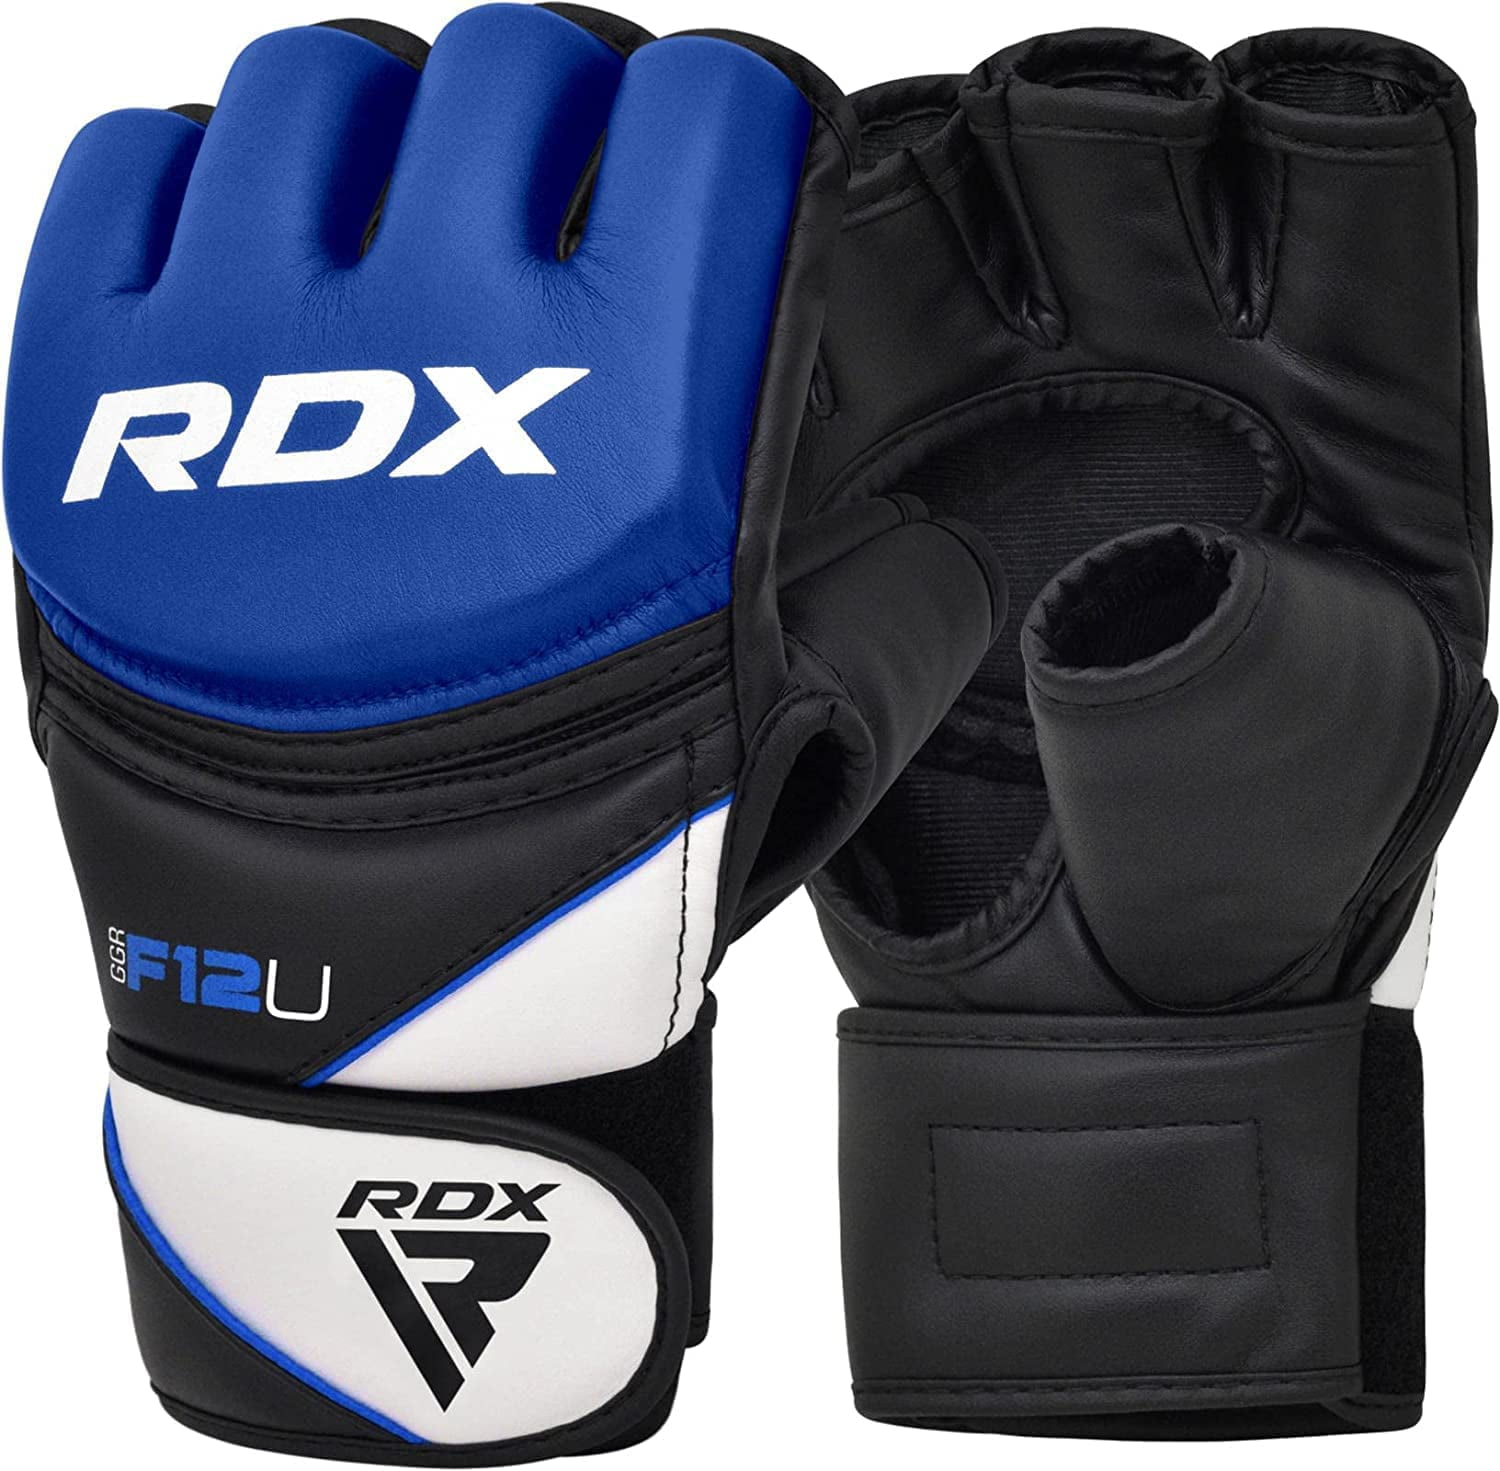 RDX MMA Gloves Grappling Sparring, Maya Hide Leather, Mixed